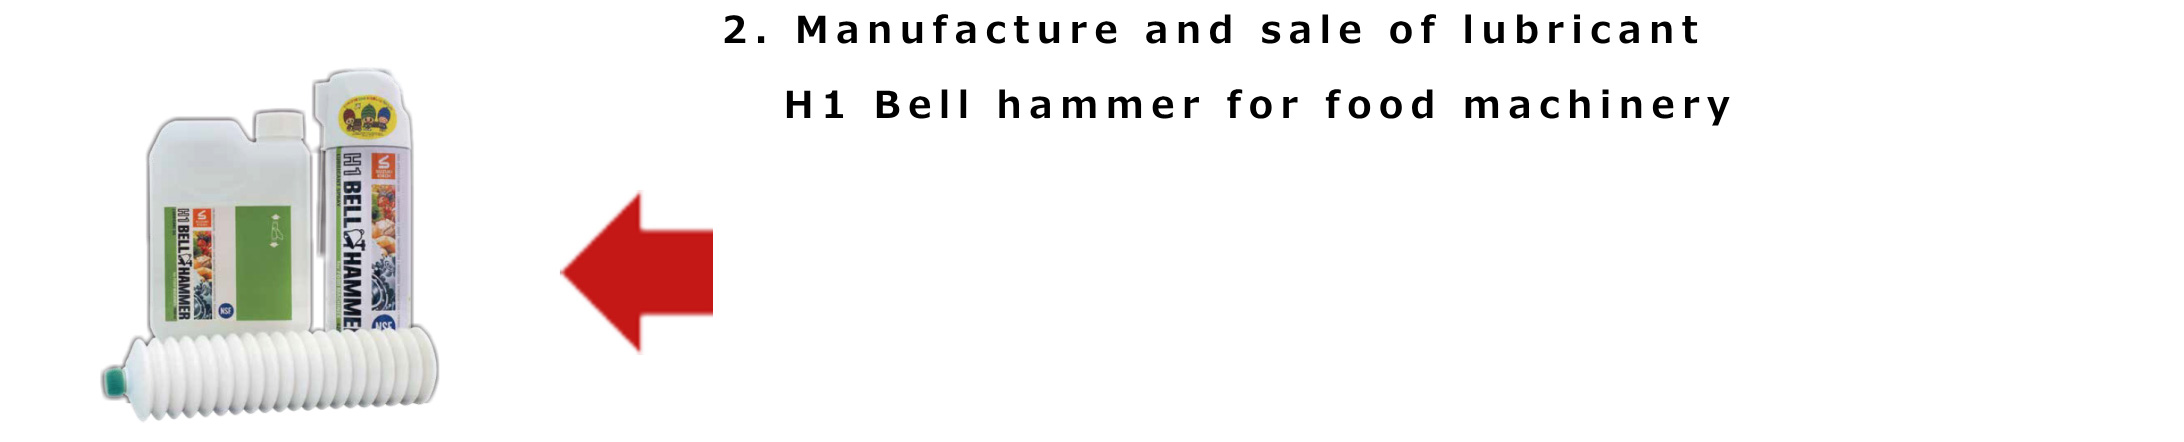 2. Manufacture and sale of lubricant H1 Bell hammer for food machinery